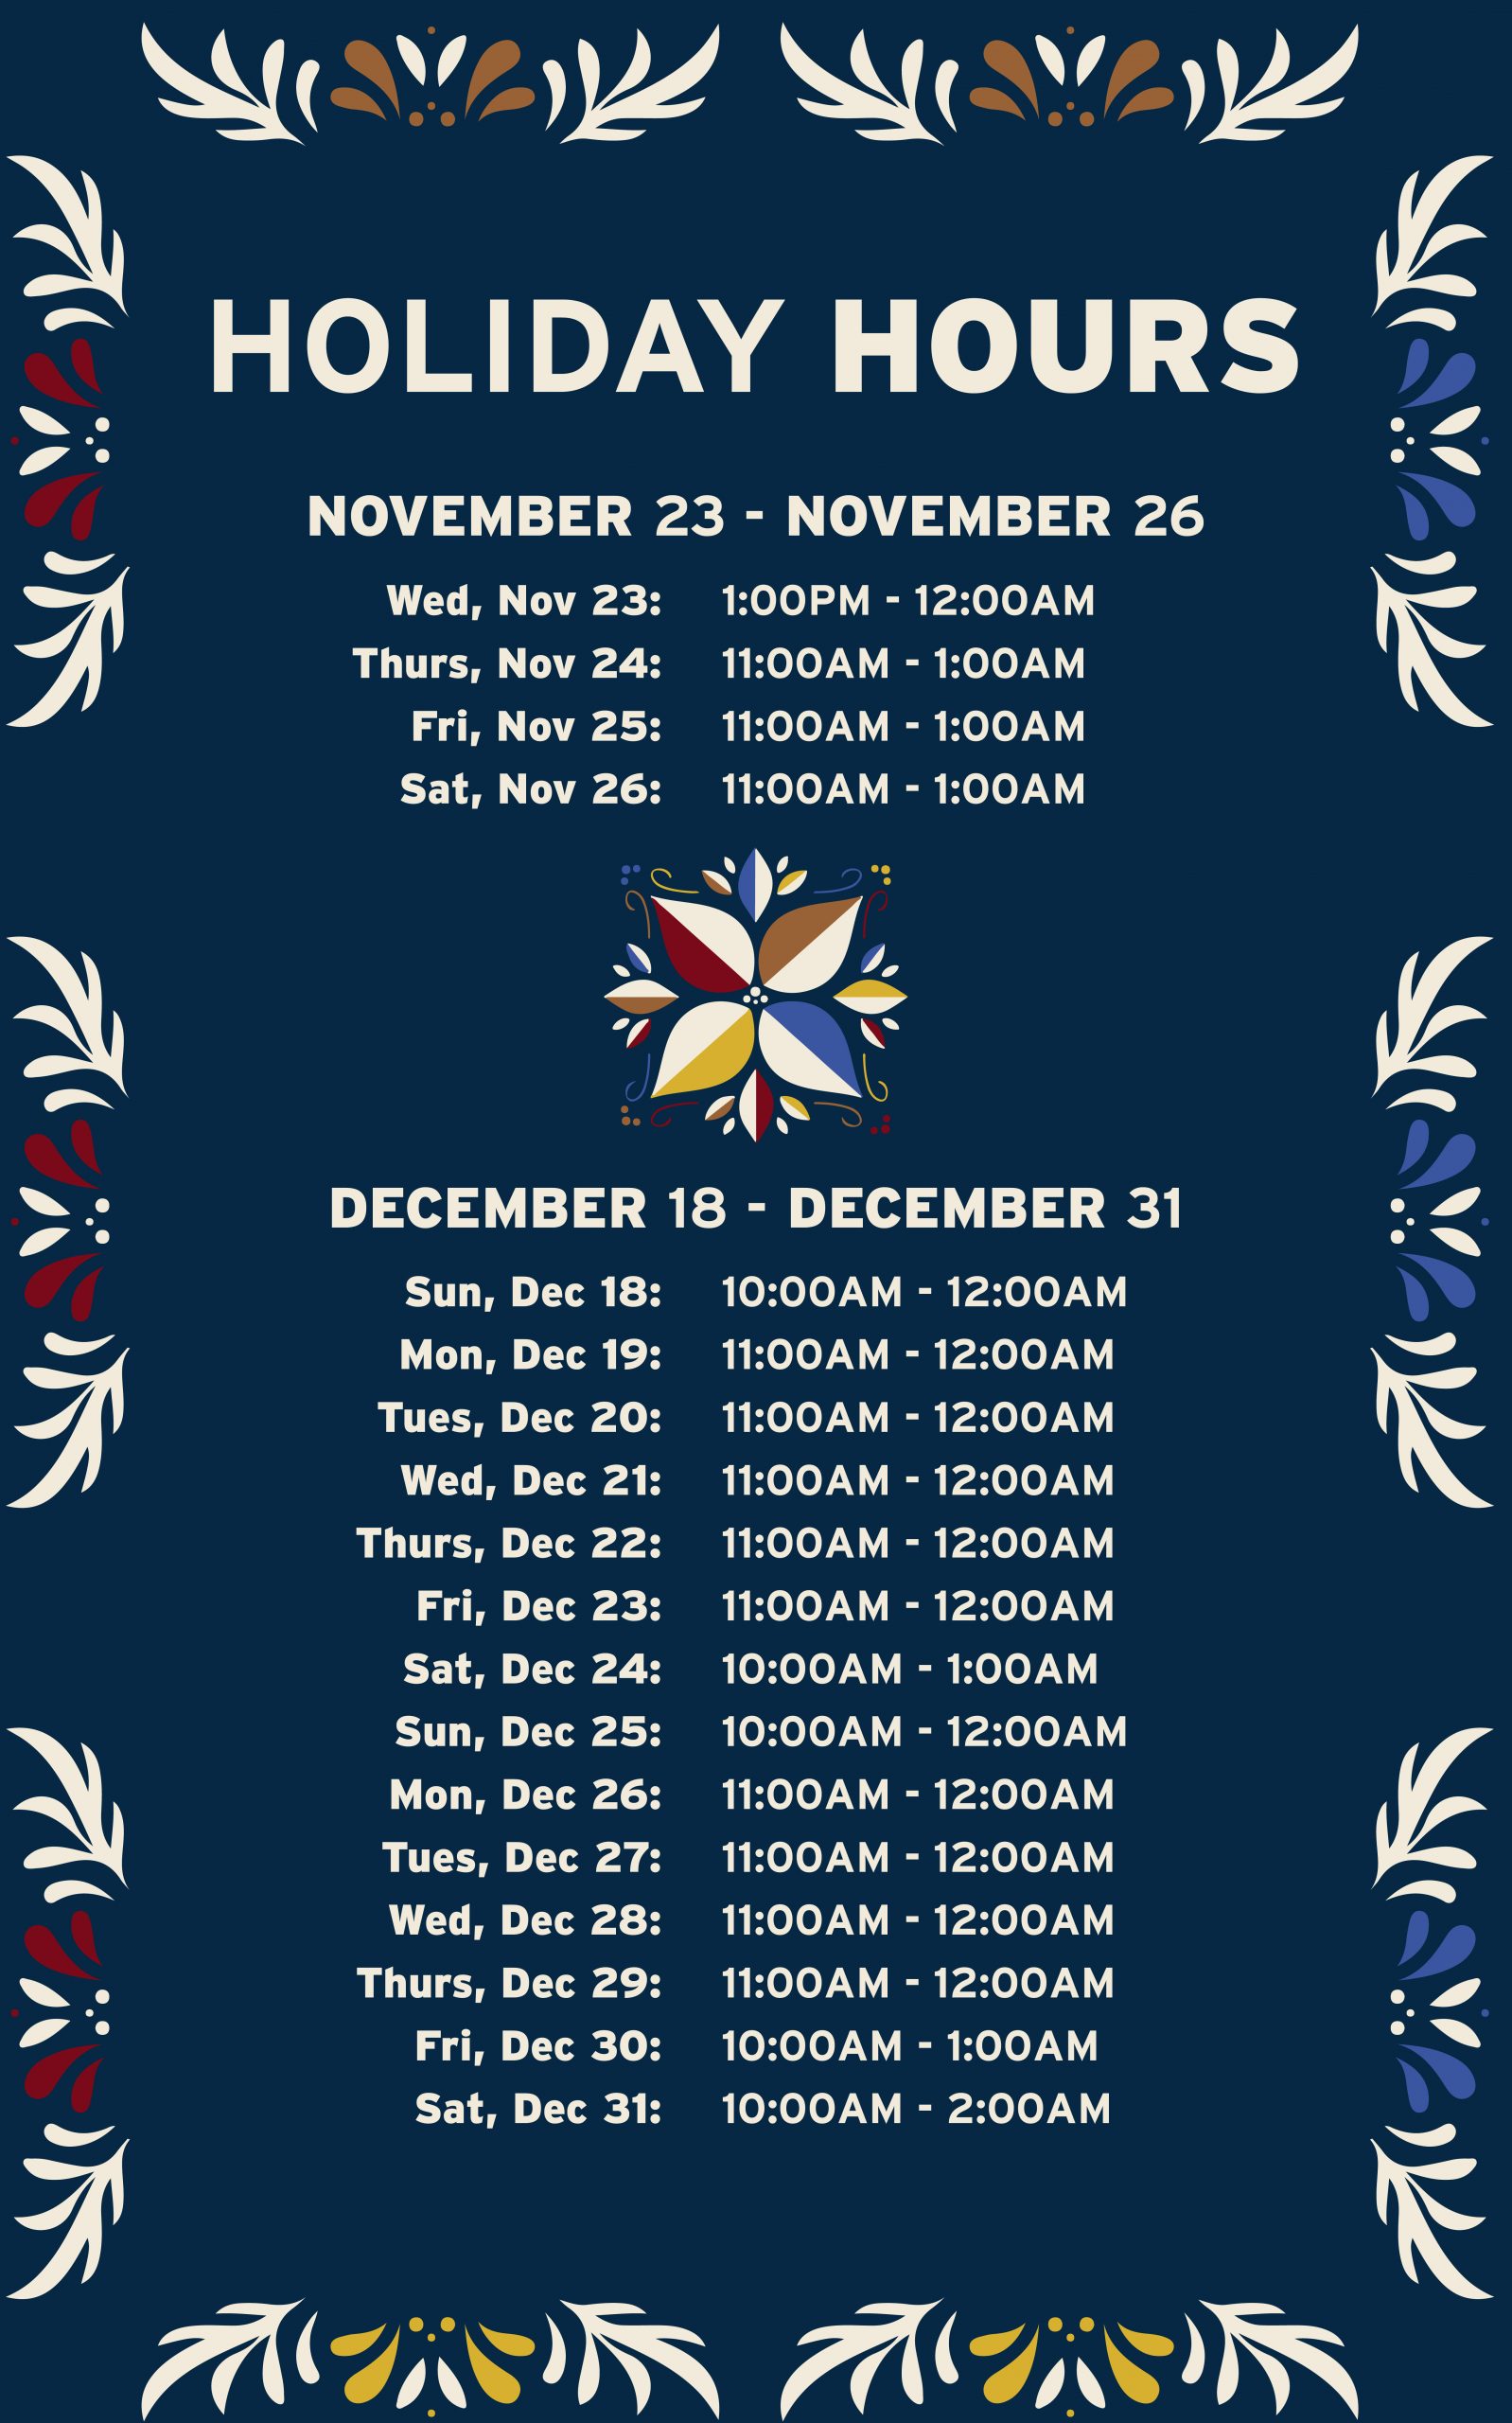 Northern Quest Holiday Hours 2022